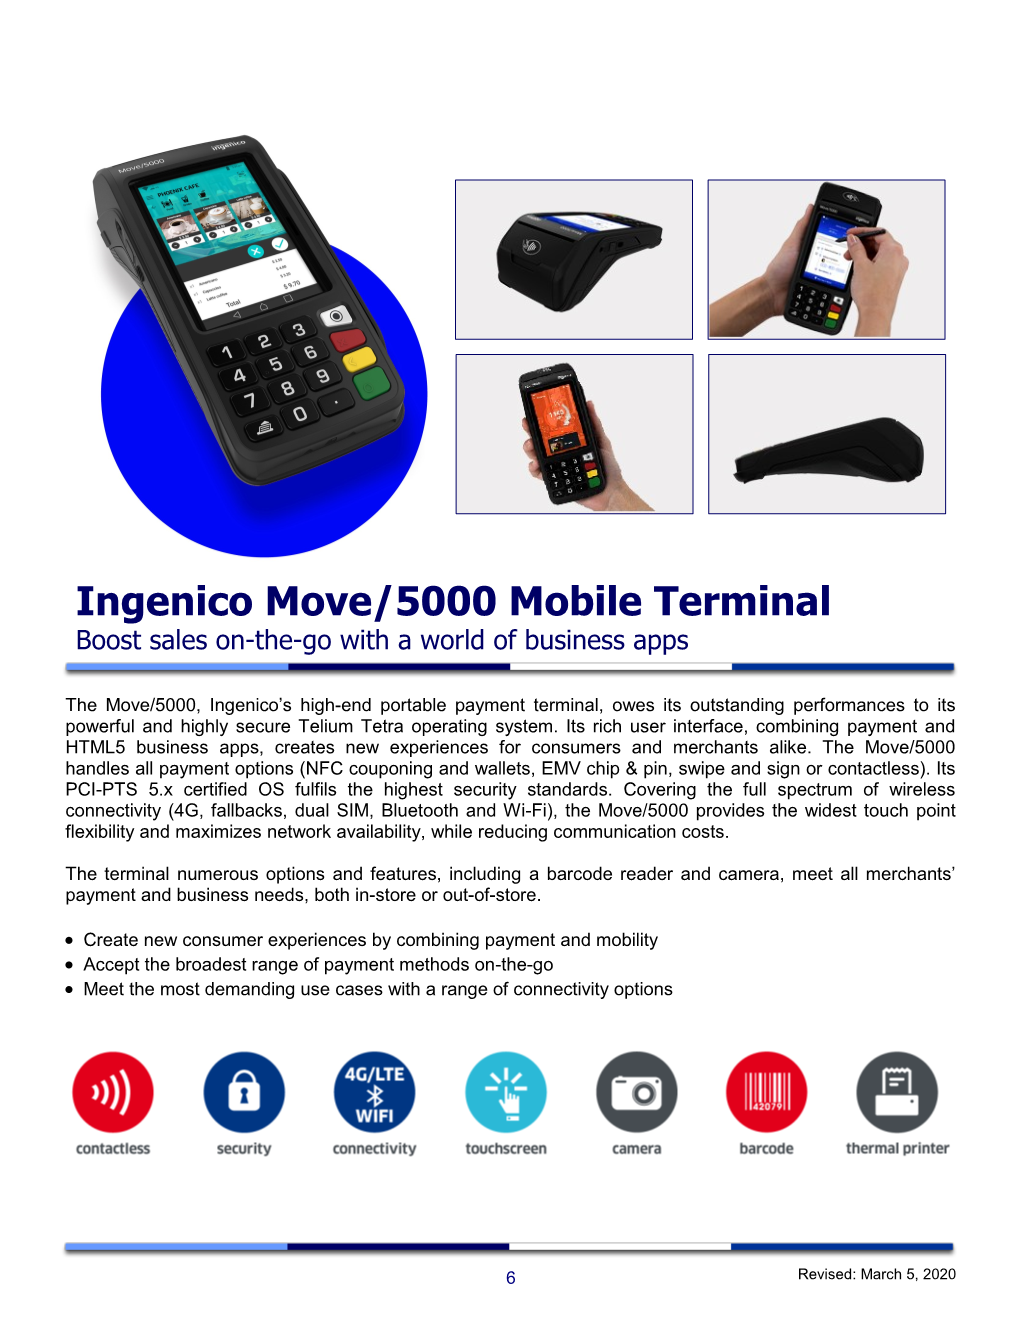 Ingenico Move/5000 Mobile Terminal Boost Sales On-The-Go with a World of Business Apps